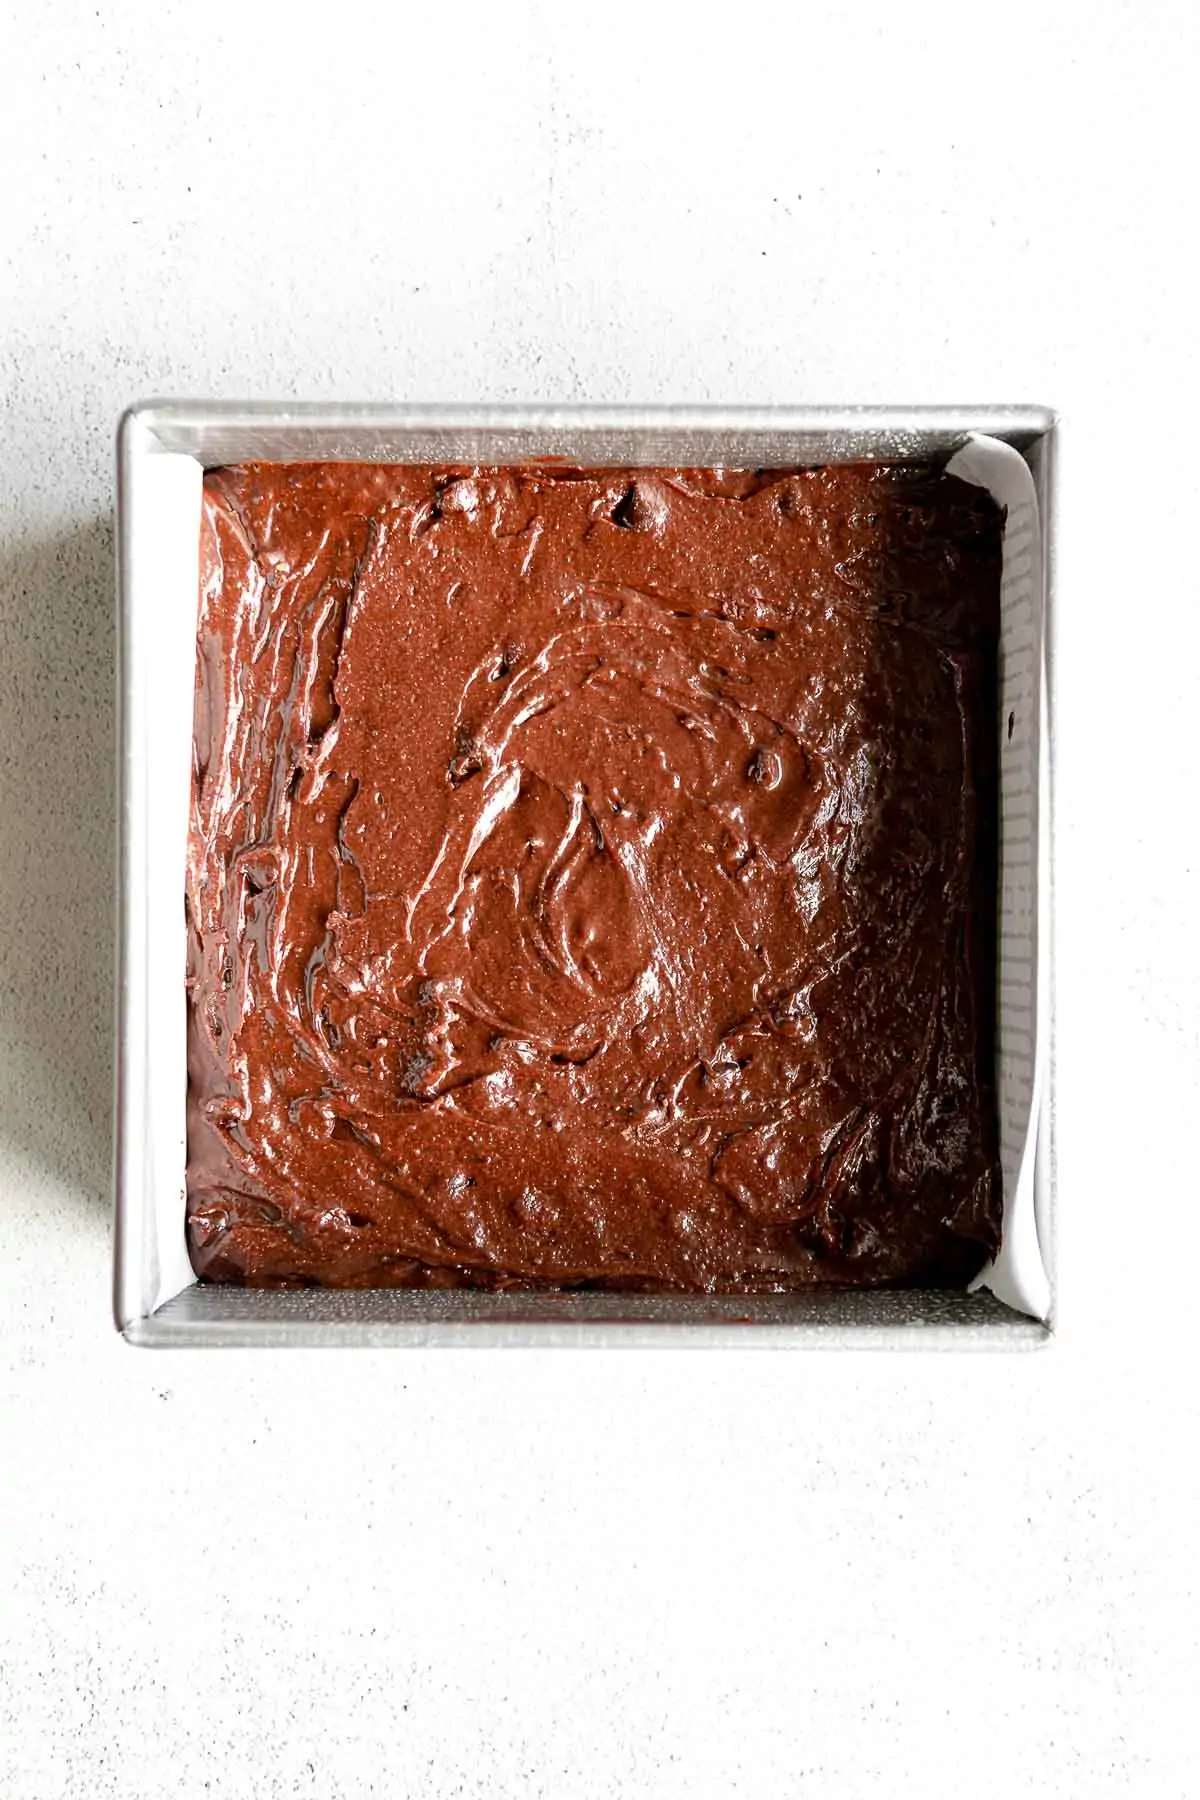 brownie batter in a pan before baking